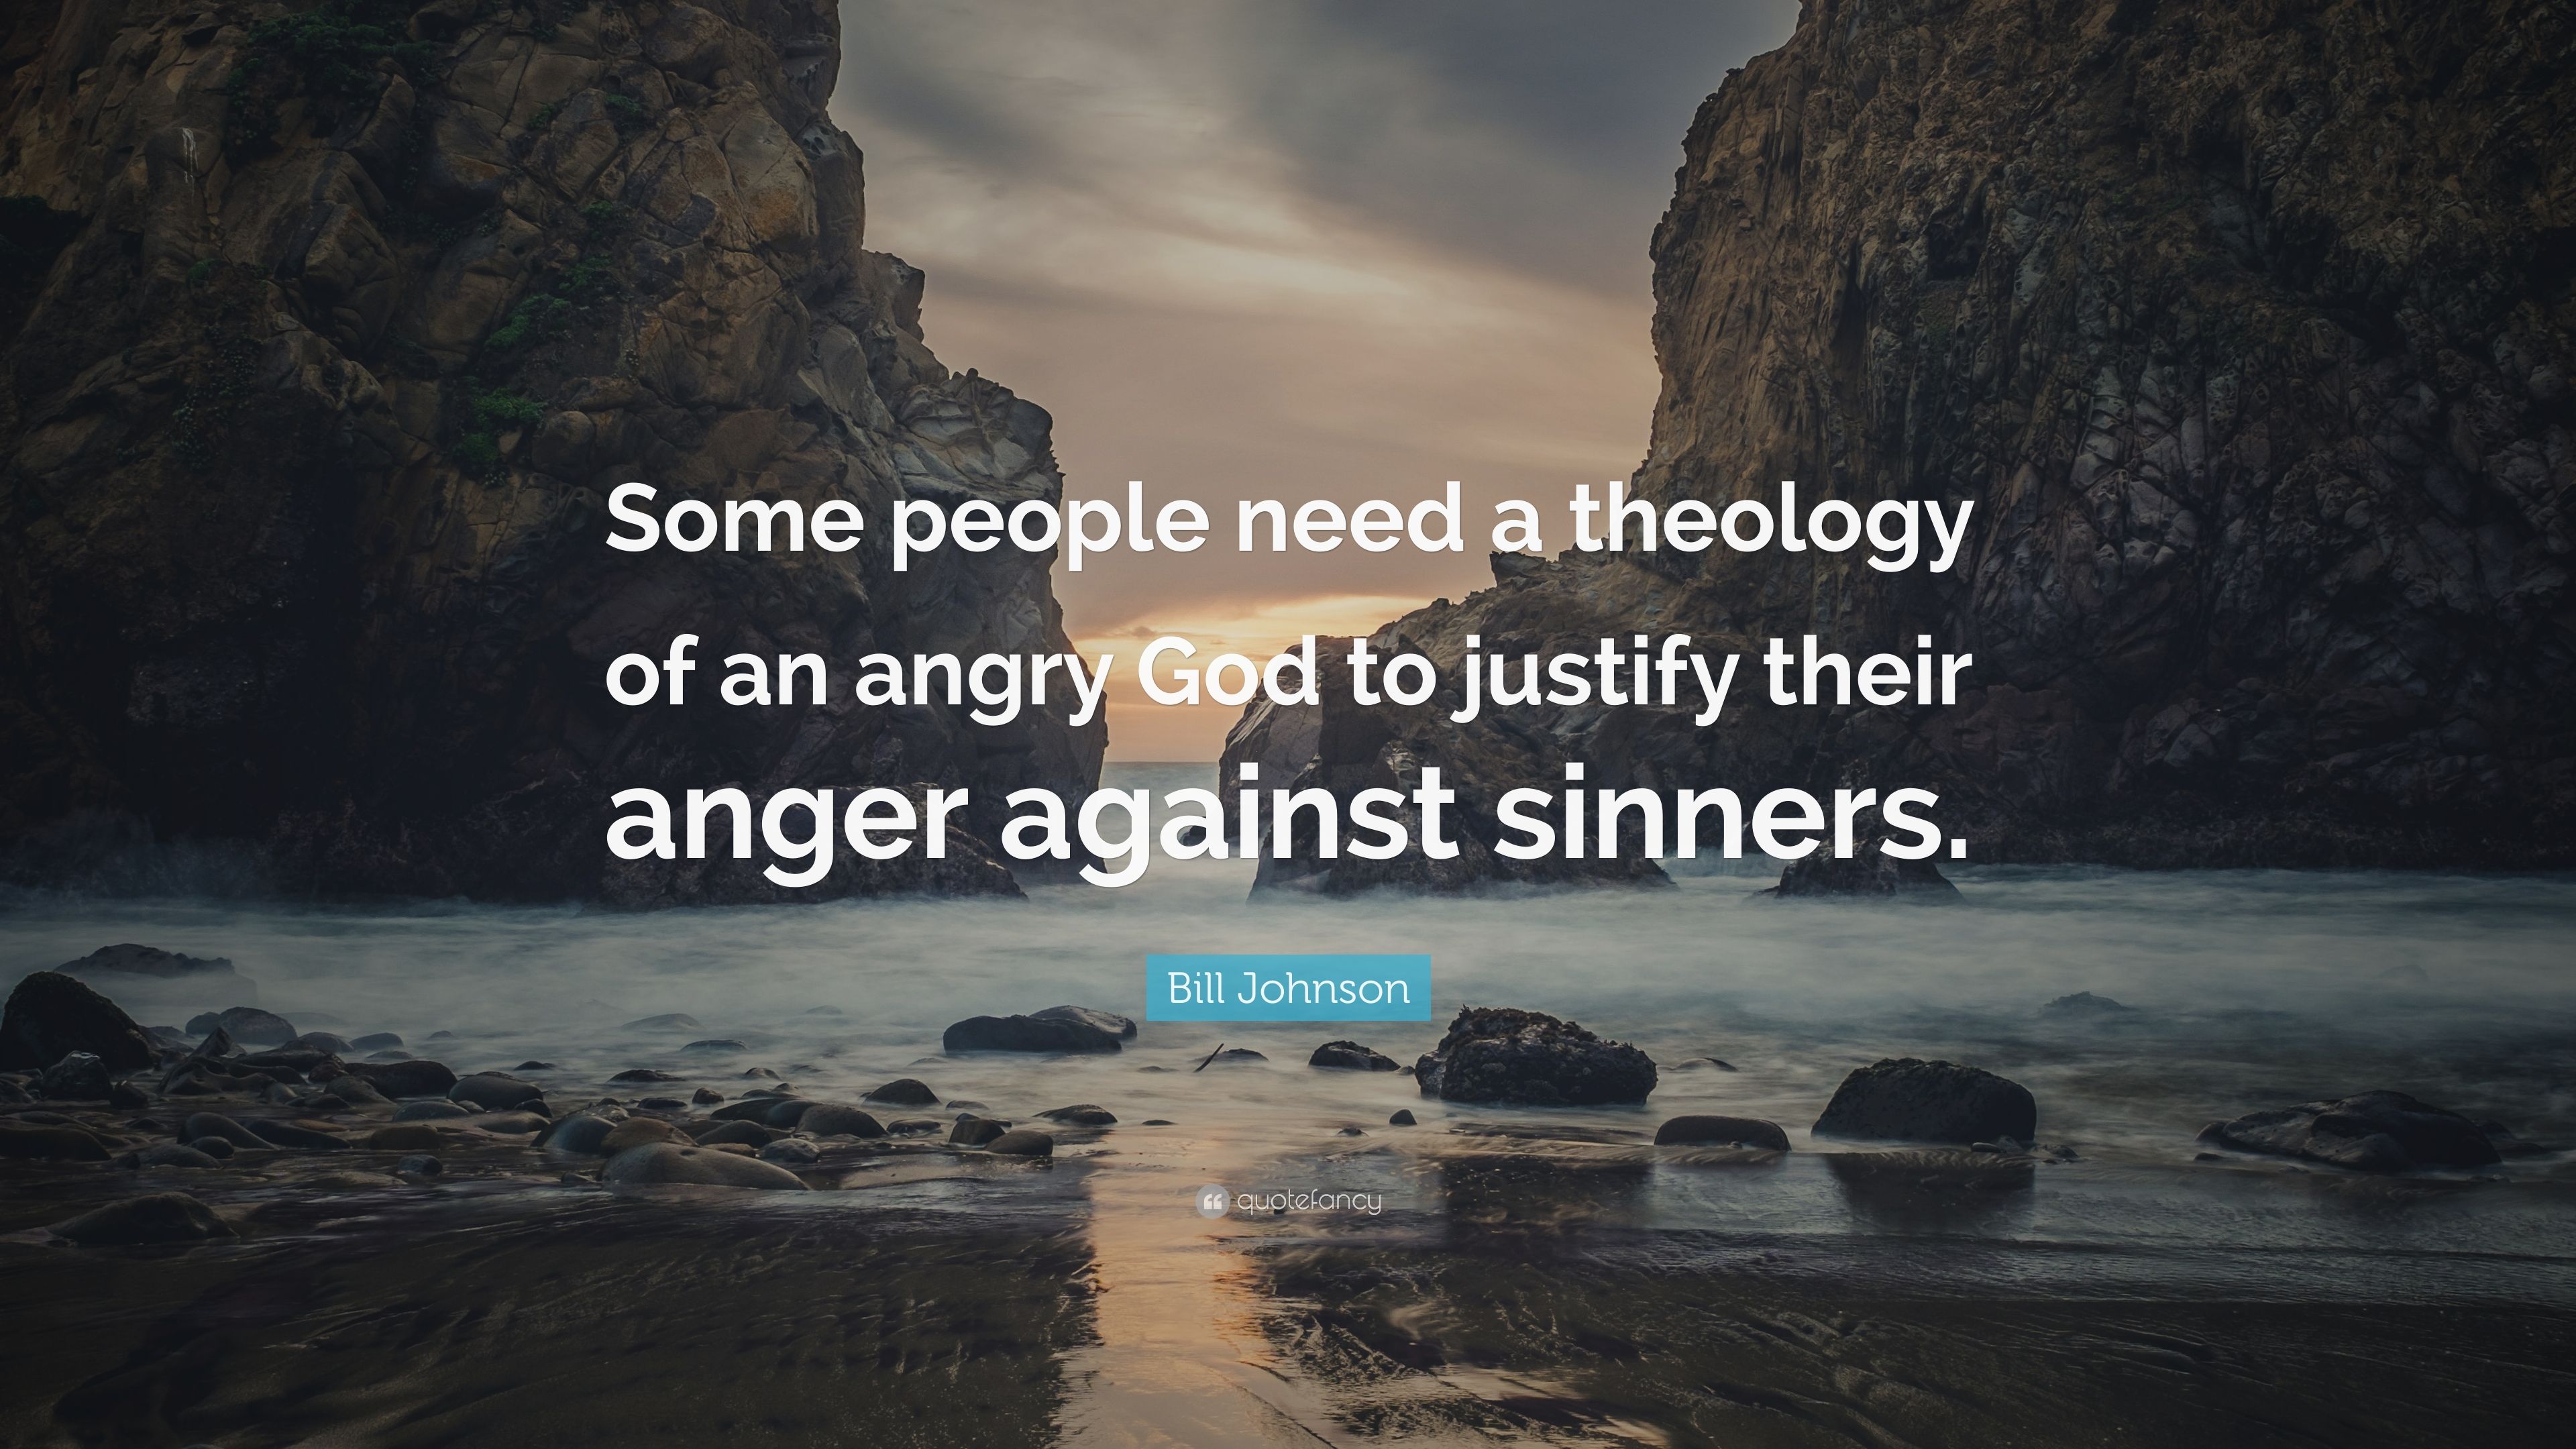 Bill Johnson Quote: "Some people need a theology of an angry God.